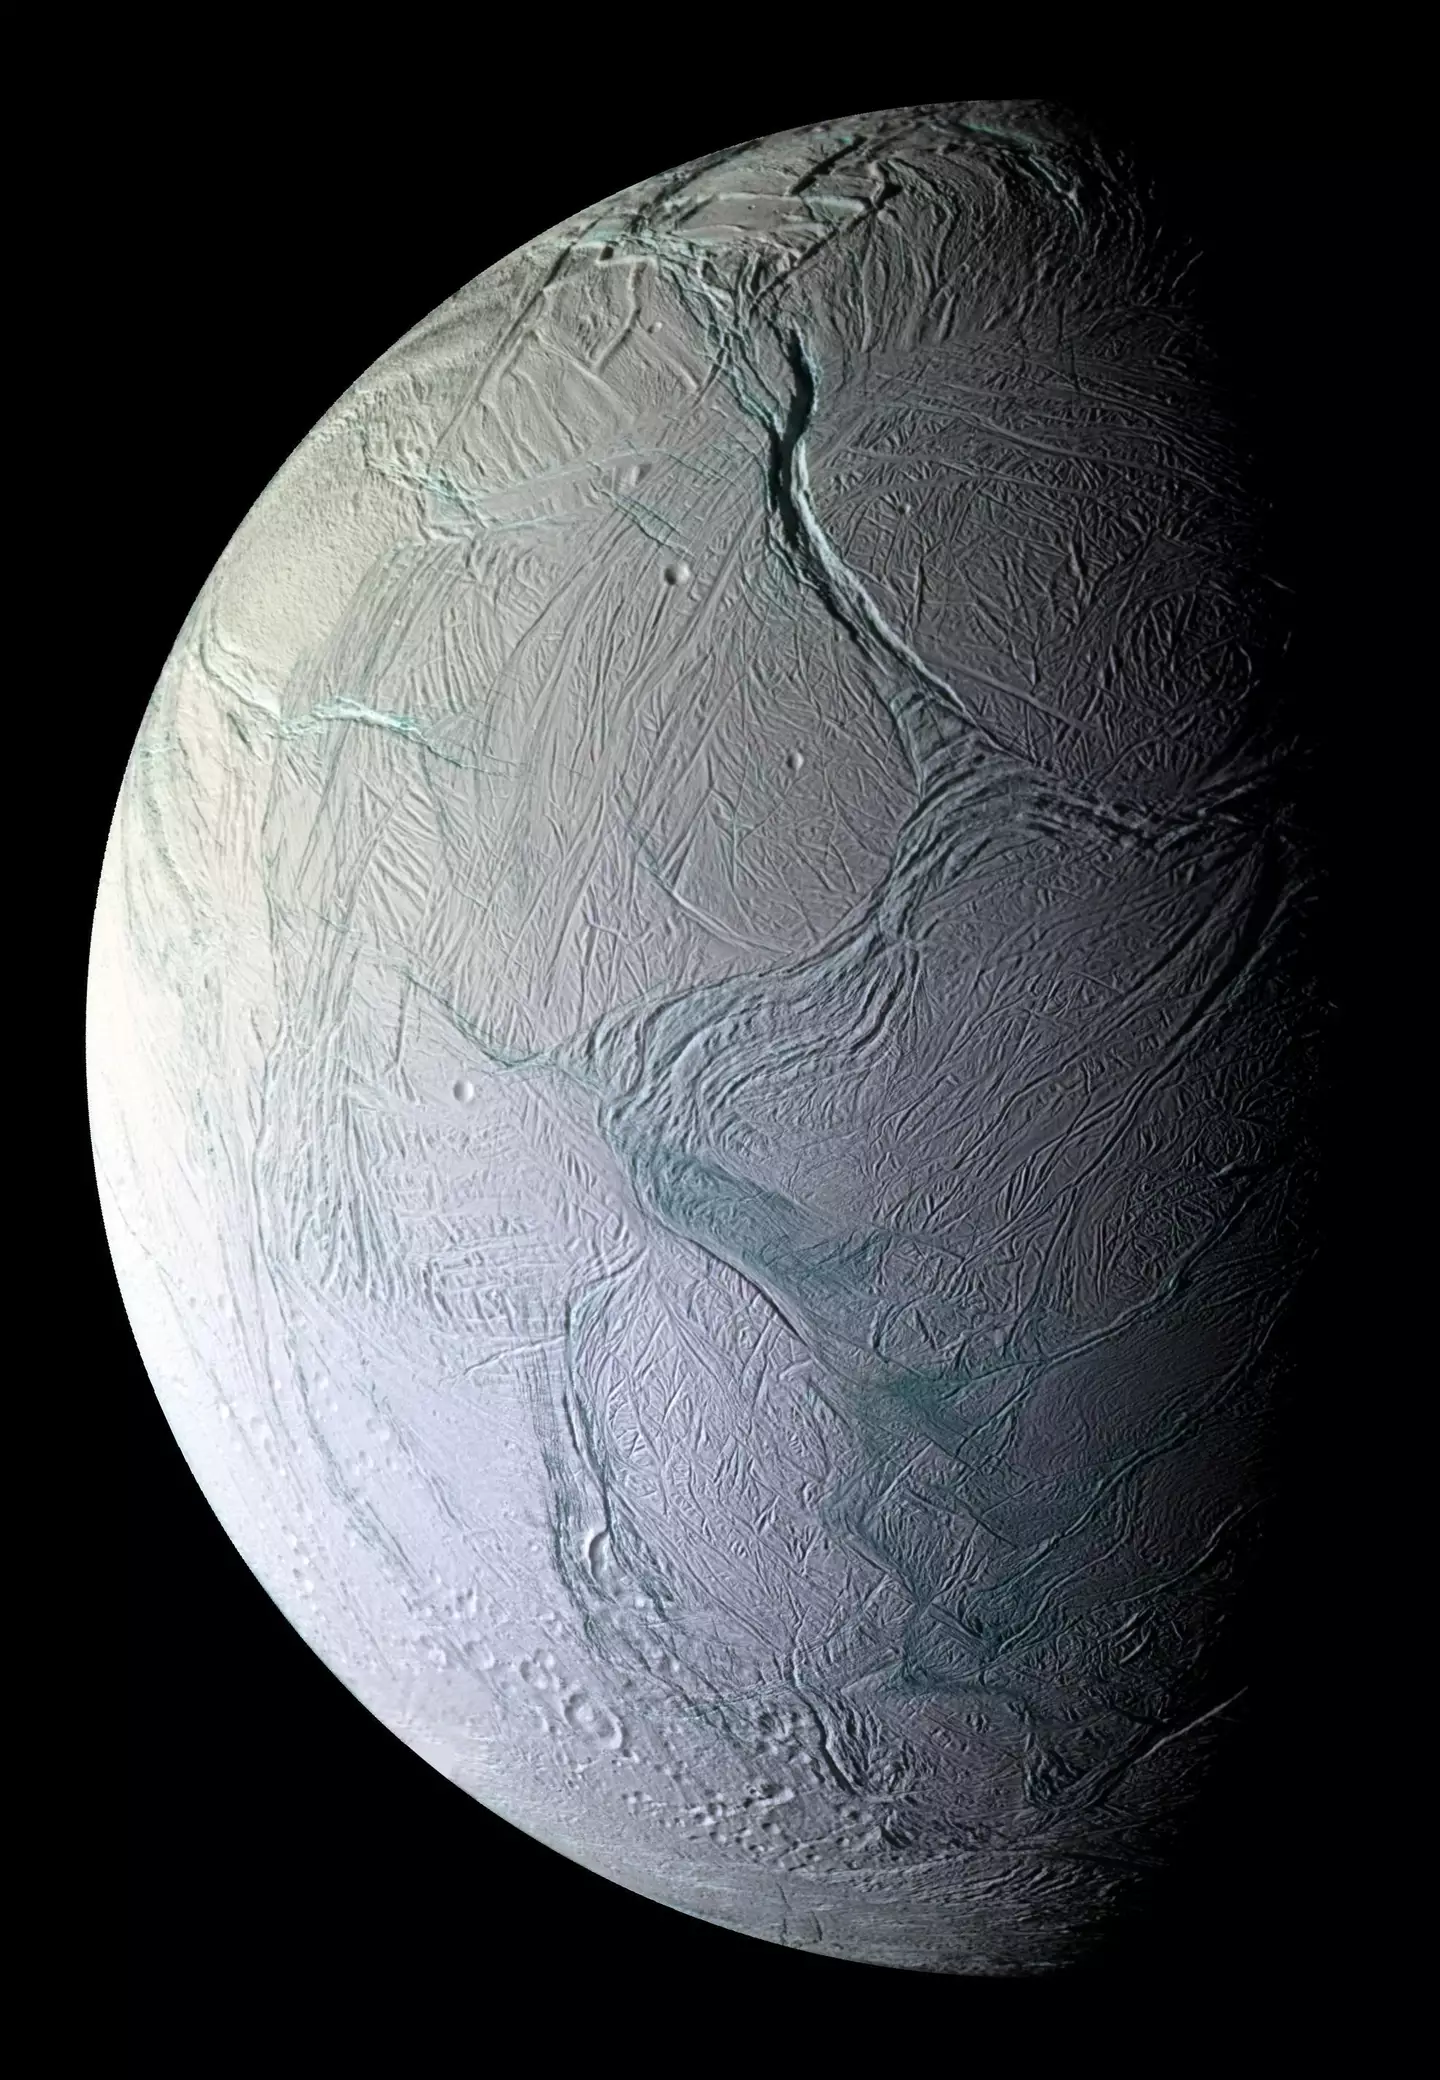 Upon finding the six core elements needed to support life, scientists say Enceladus could be habitable.